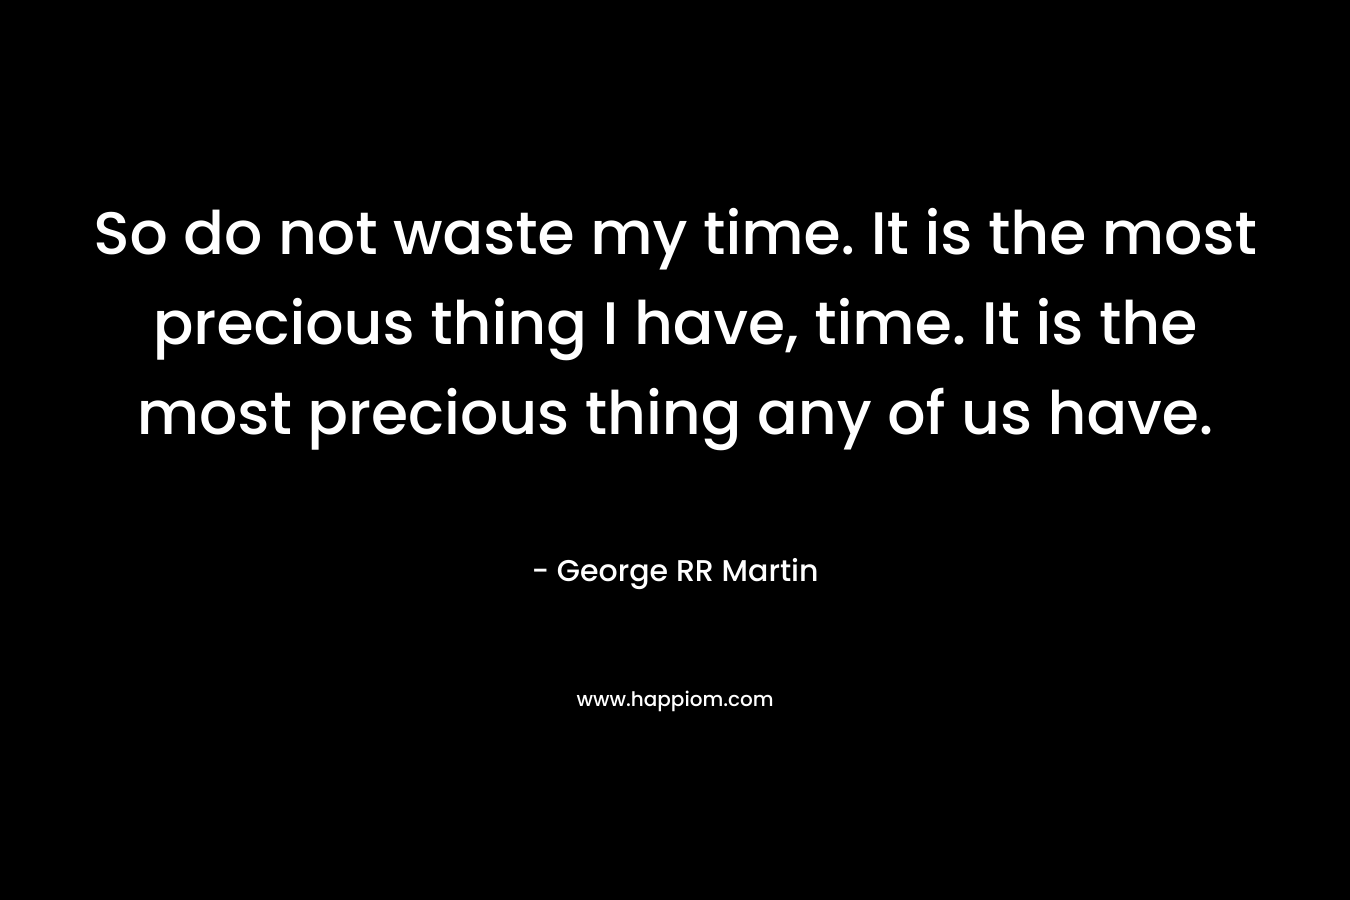 So do not waste my time. It is the most precious thing I have, time. It is the most precious thing any of us have.